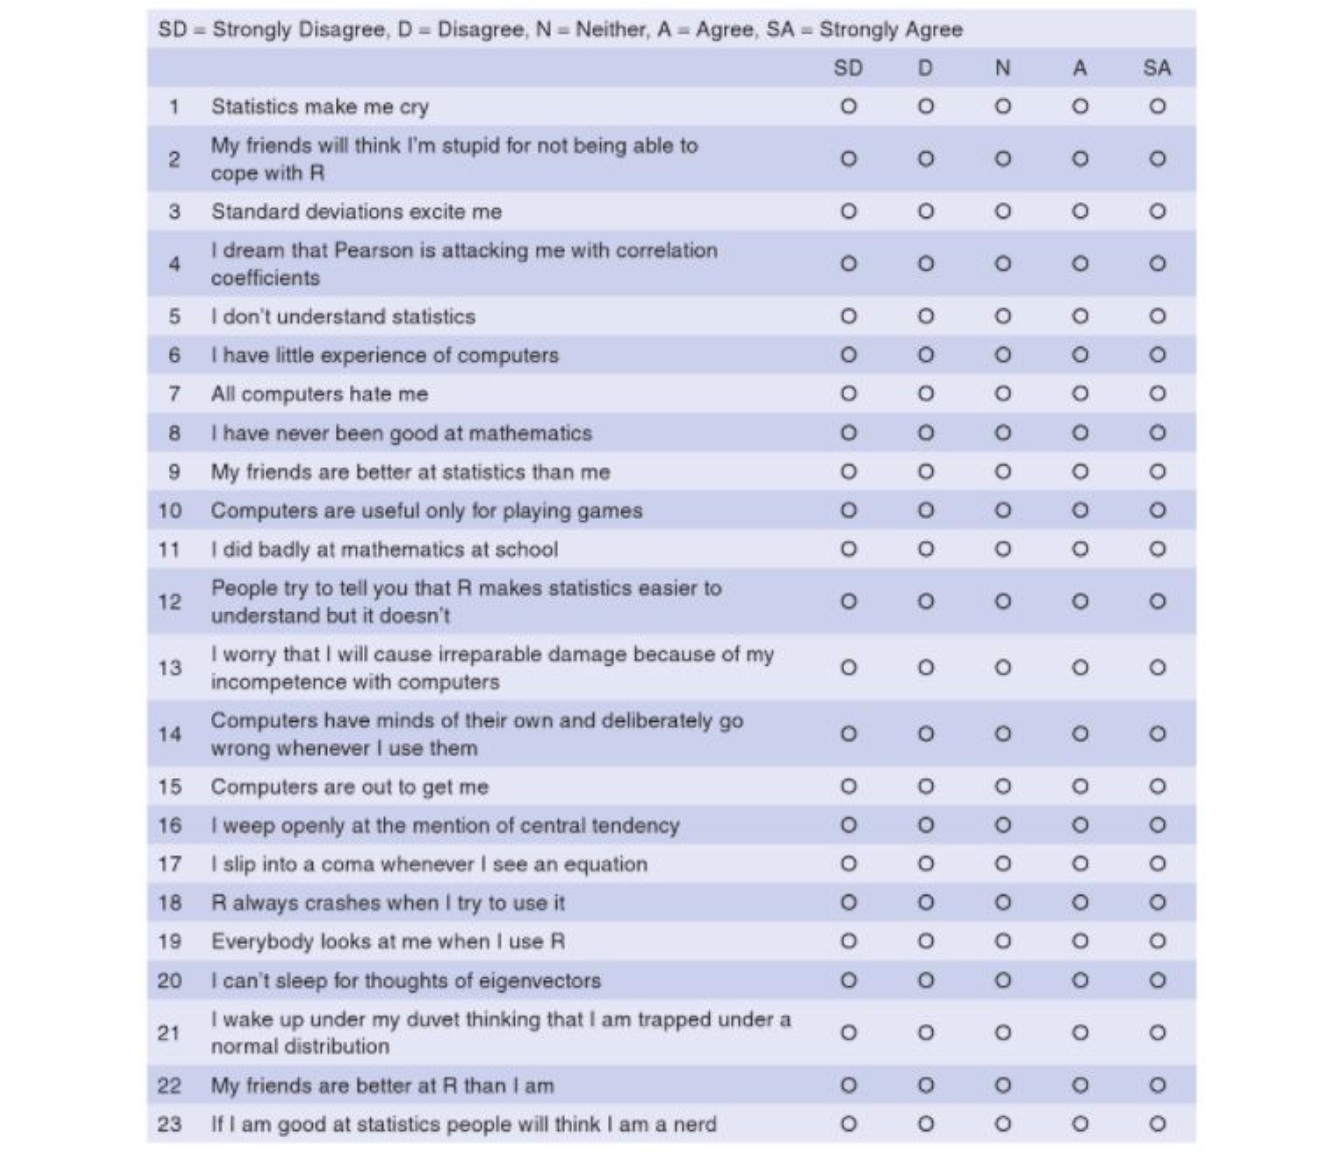 The R anxiety questionnaire (source: Field, A. et al. (2012): Discovering Statistics Using R, p. 768)